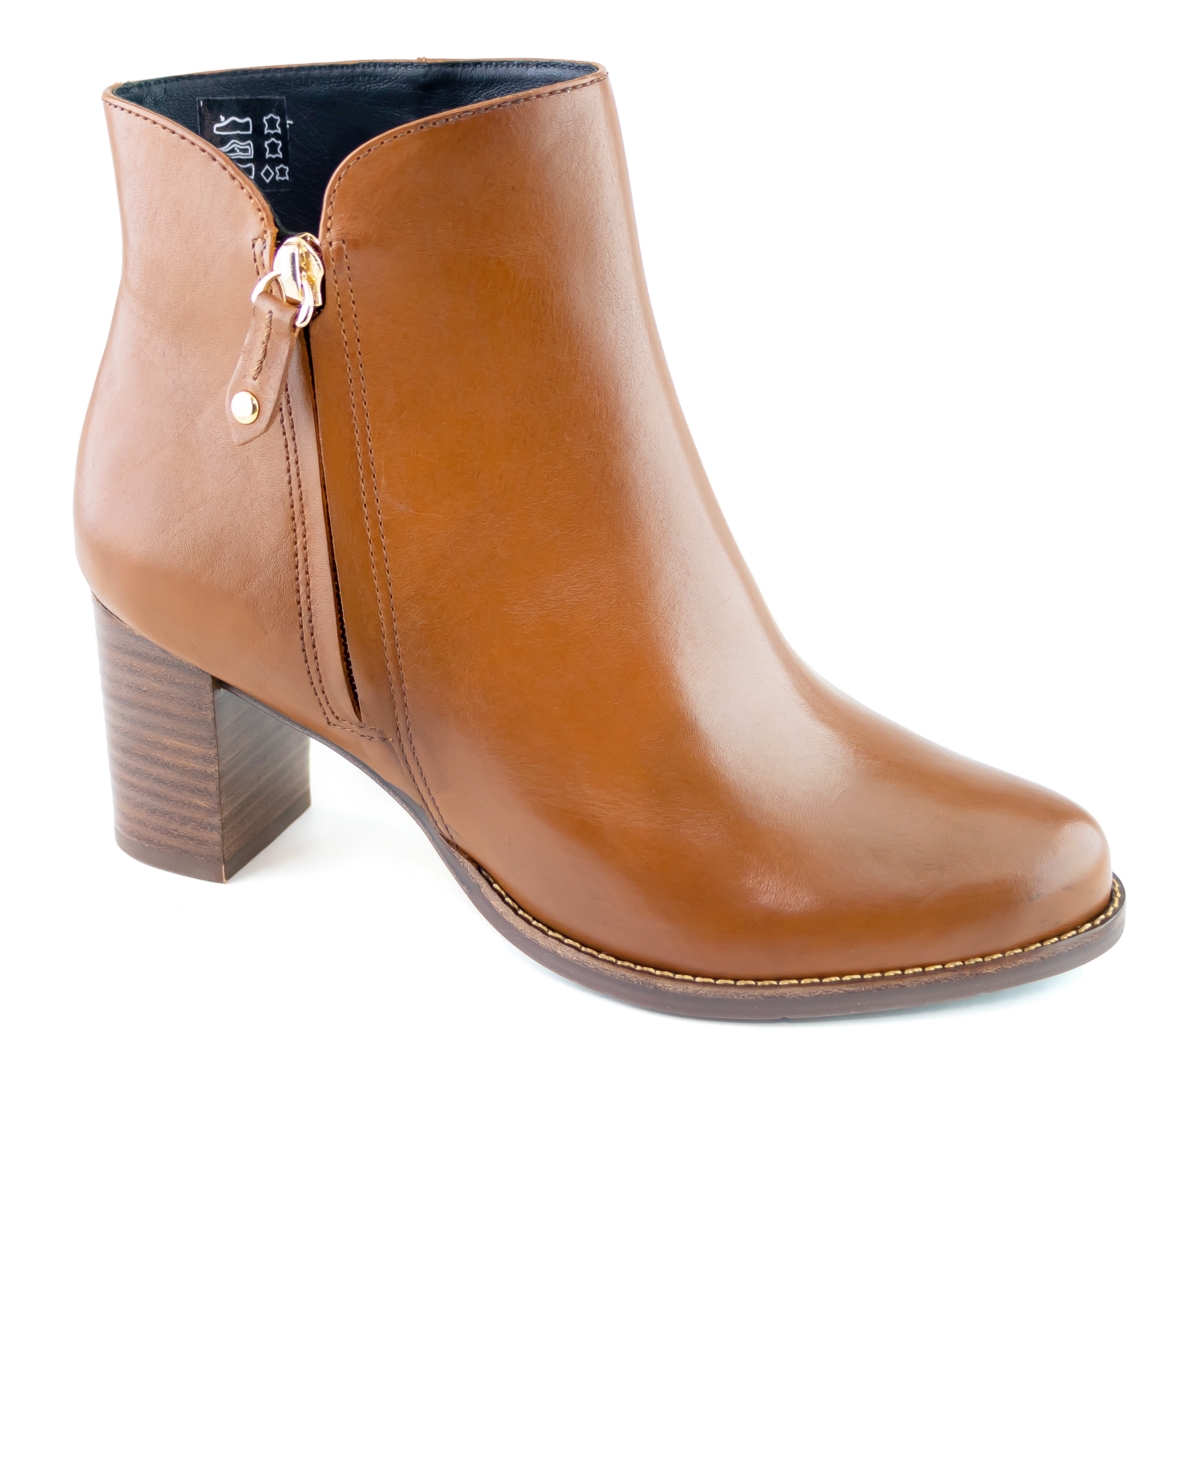 Women's Spring Street Leather Booties - Cognac Burnished Napa